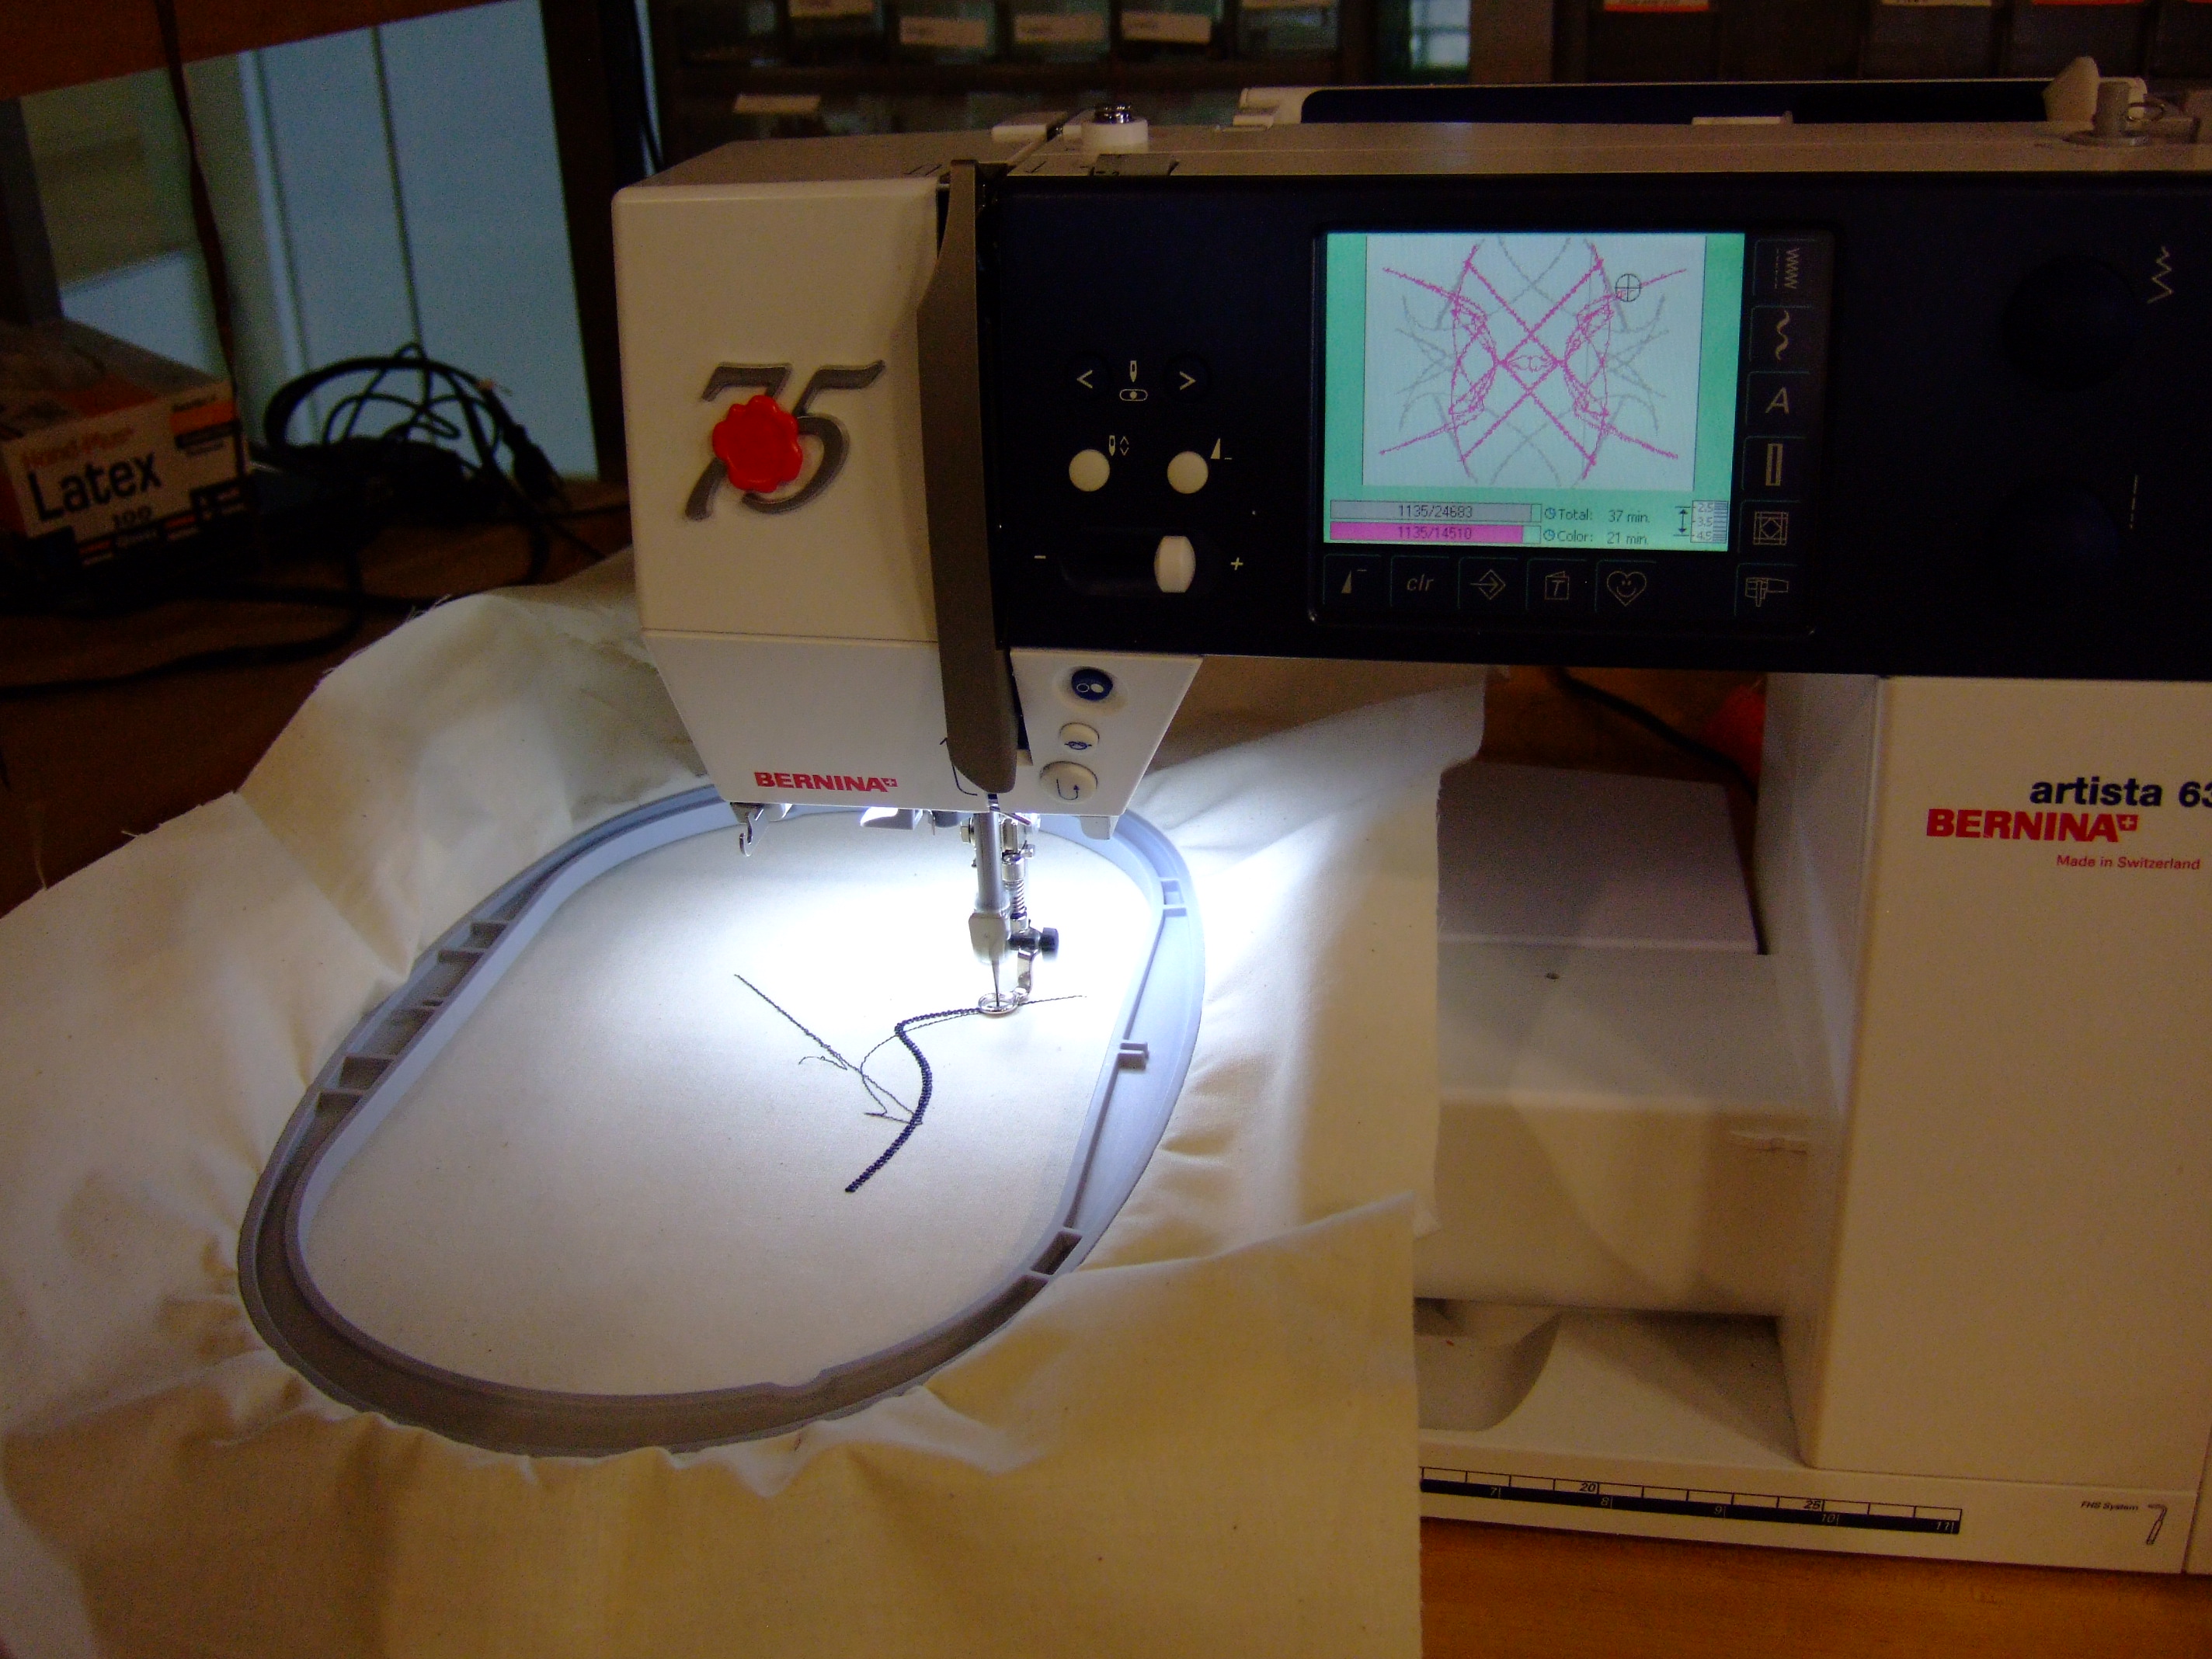 Embroidery machine at work